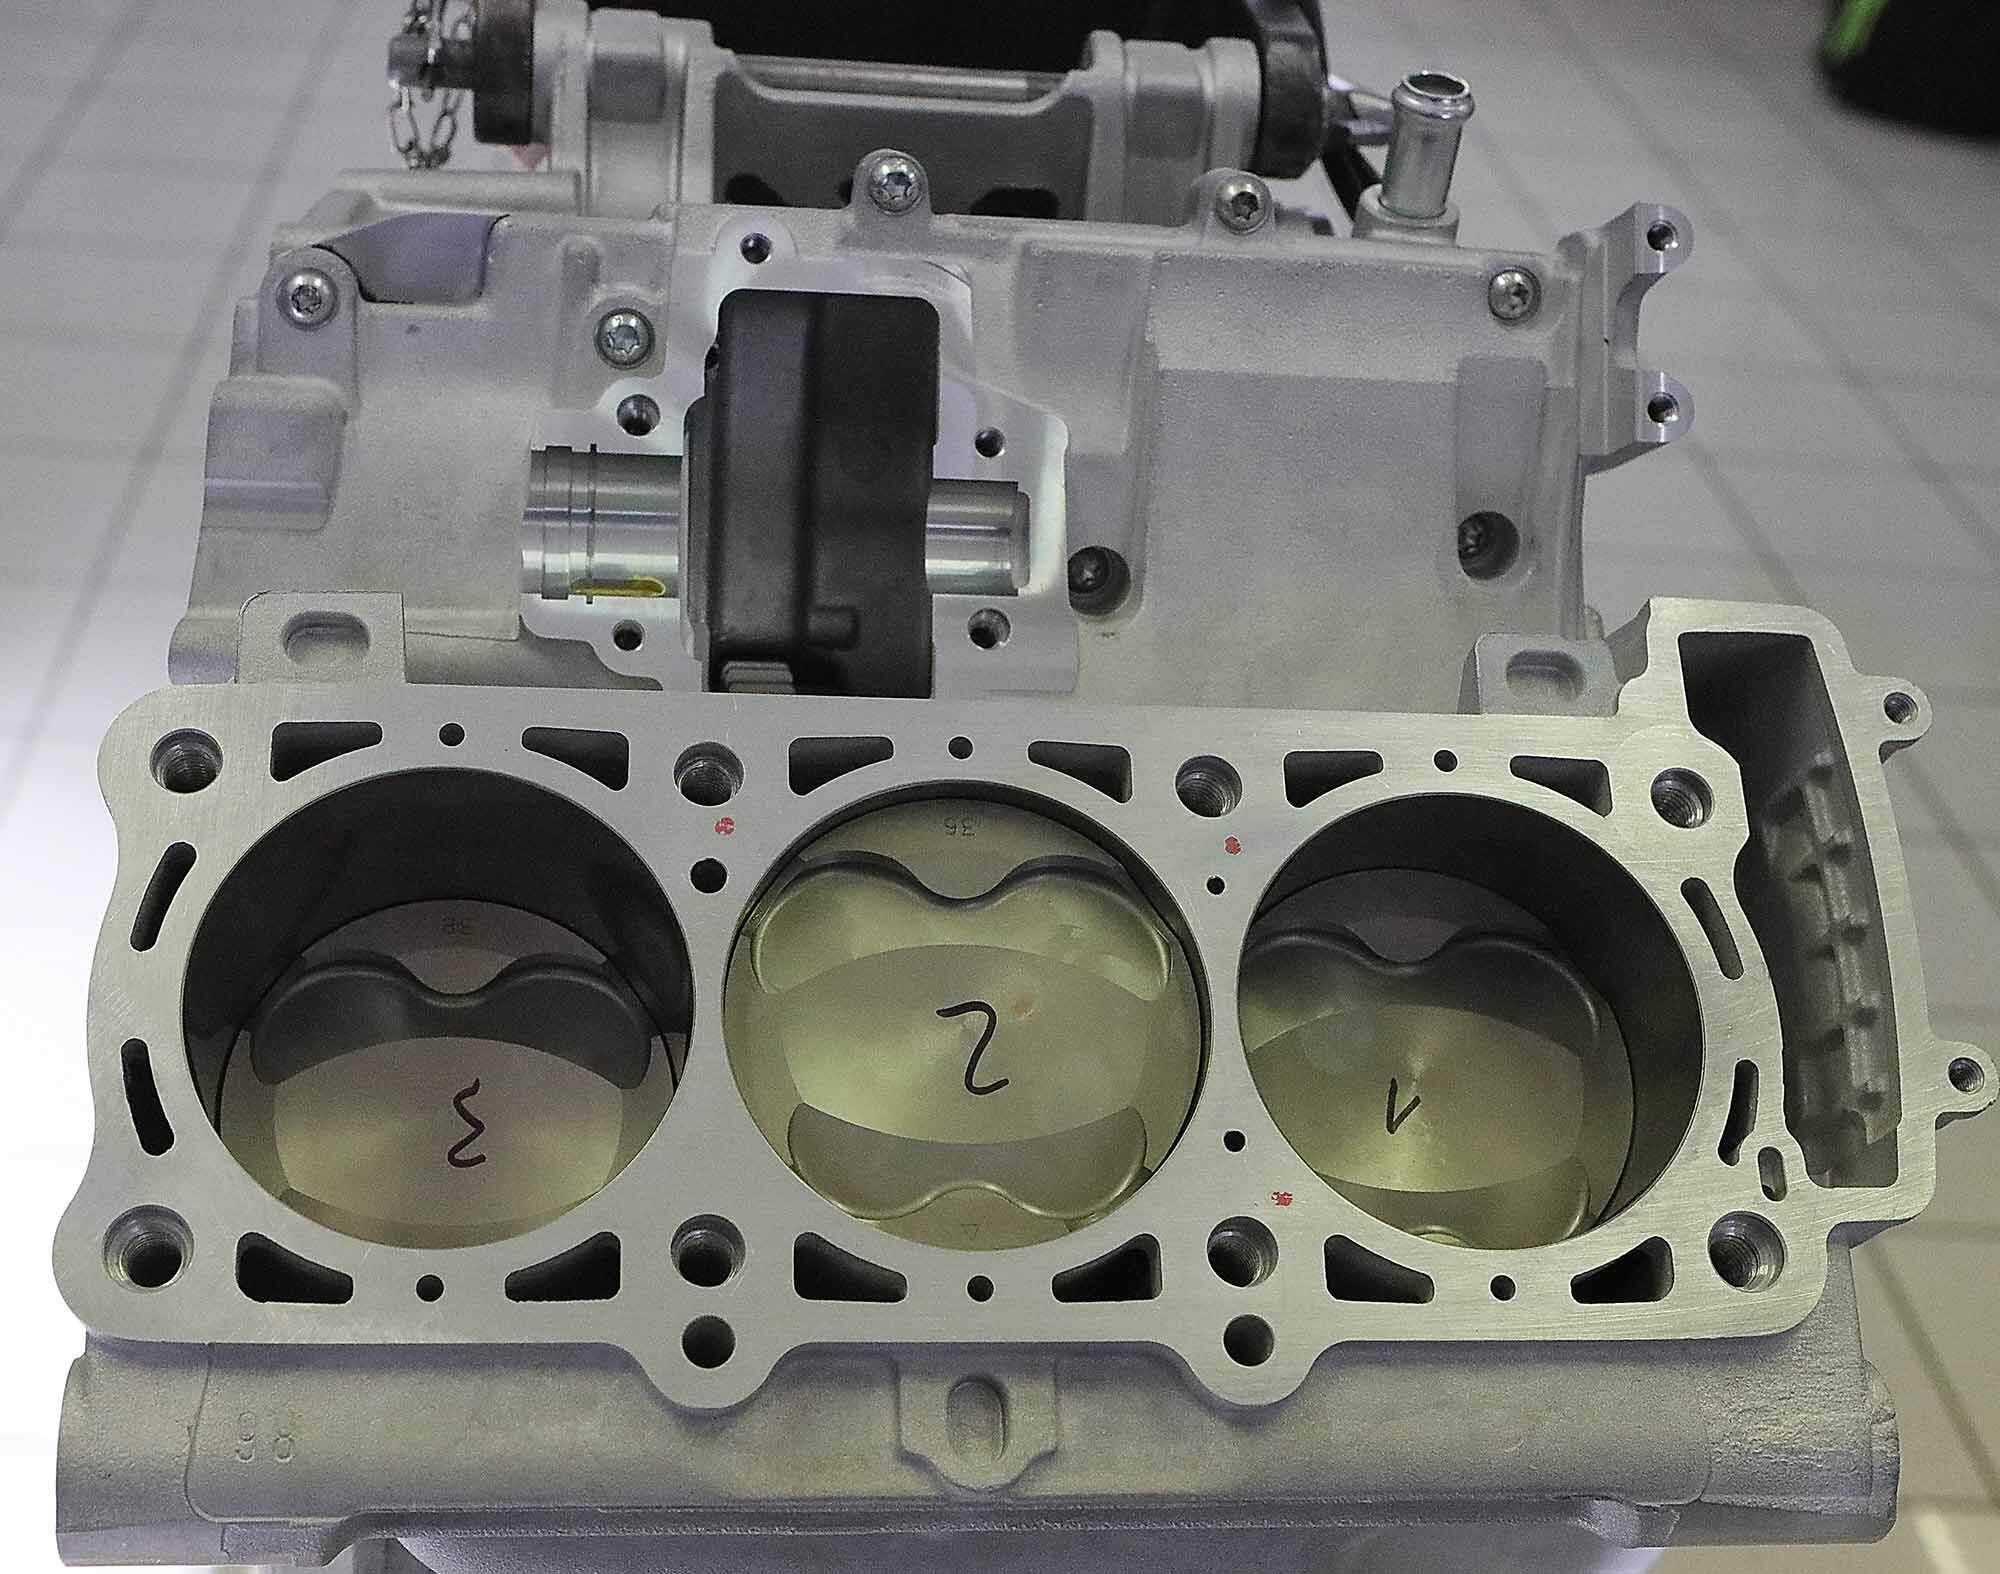 The cylinder block is a closed-deck design. The 81mm pistons have a clean top with large squish areas and a 12.5:1 compression ratio. Cylinder block, crankcase, and head are all gravity sand cast. New dies ensure superior quality and structural consistency.